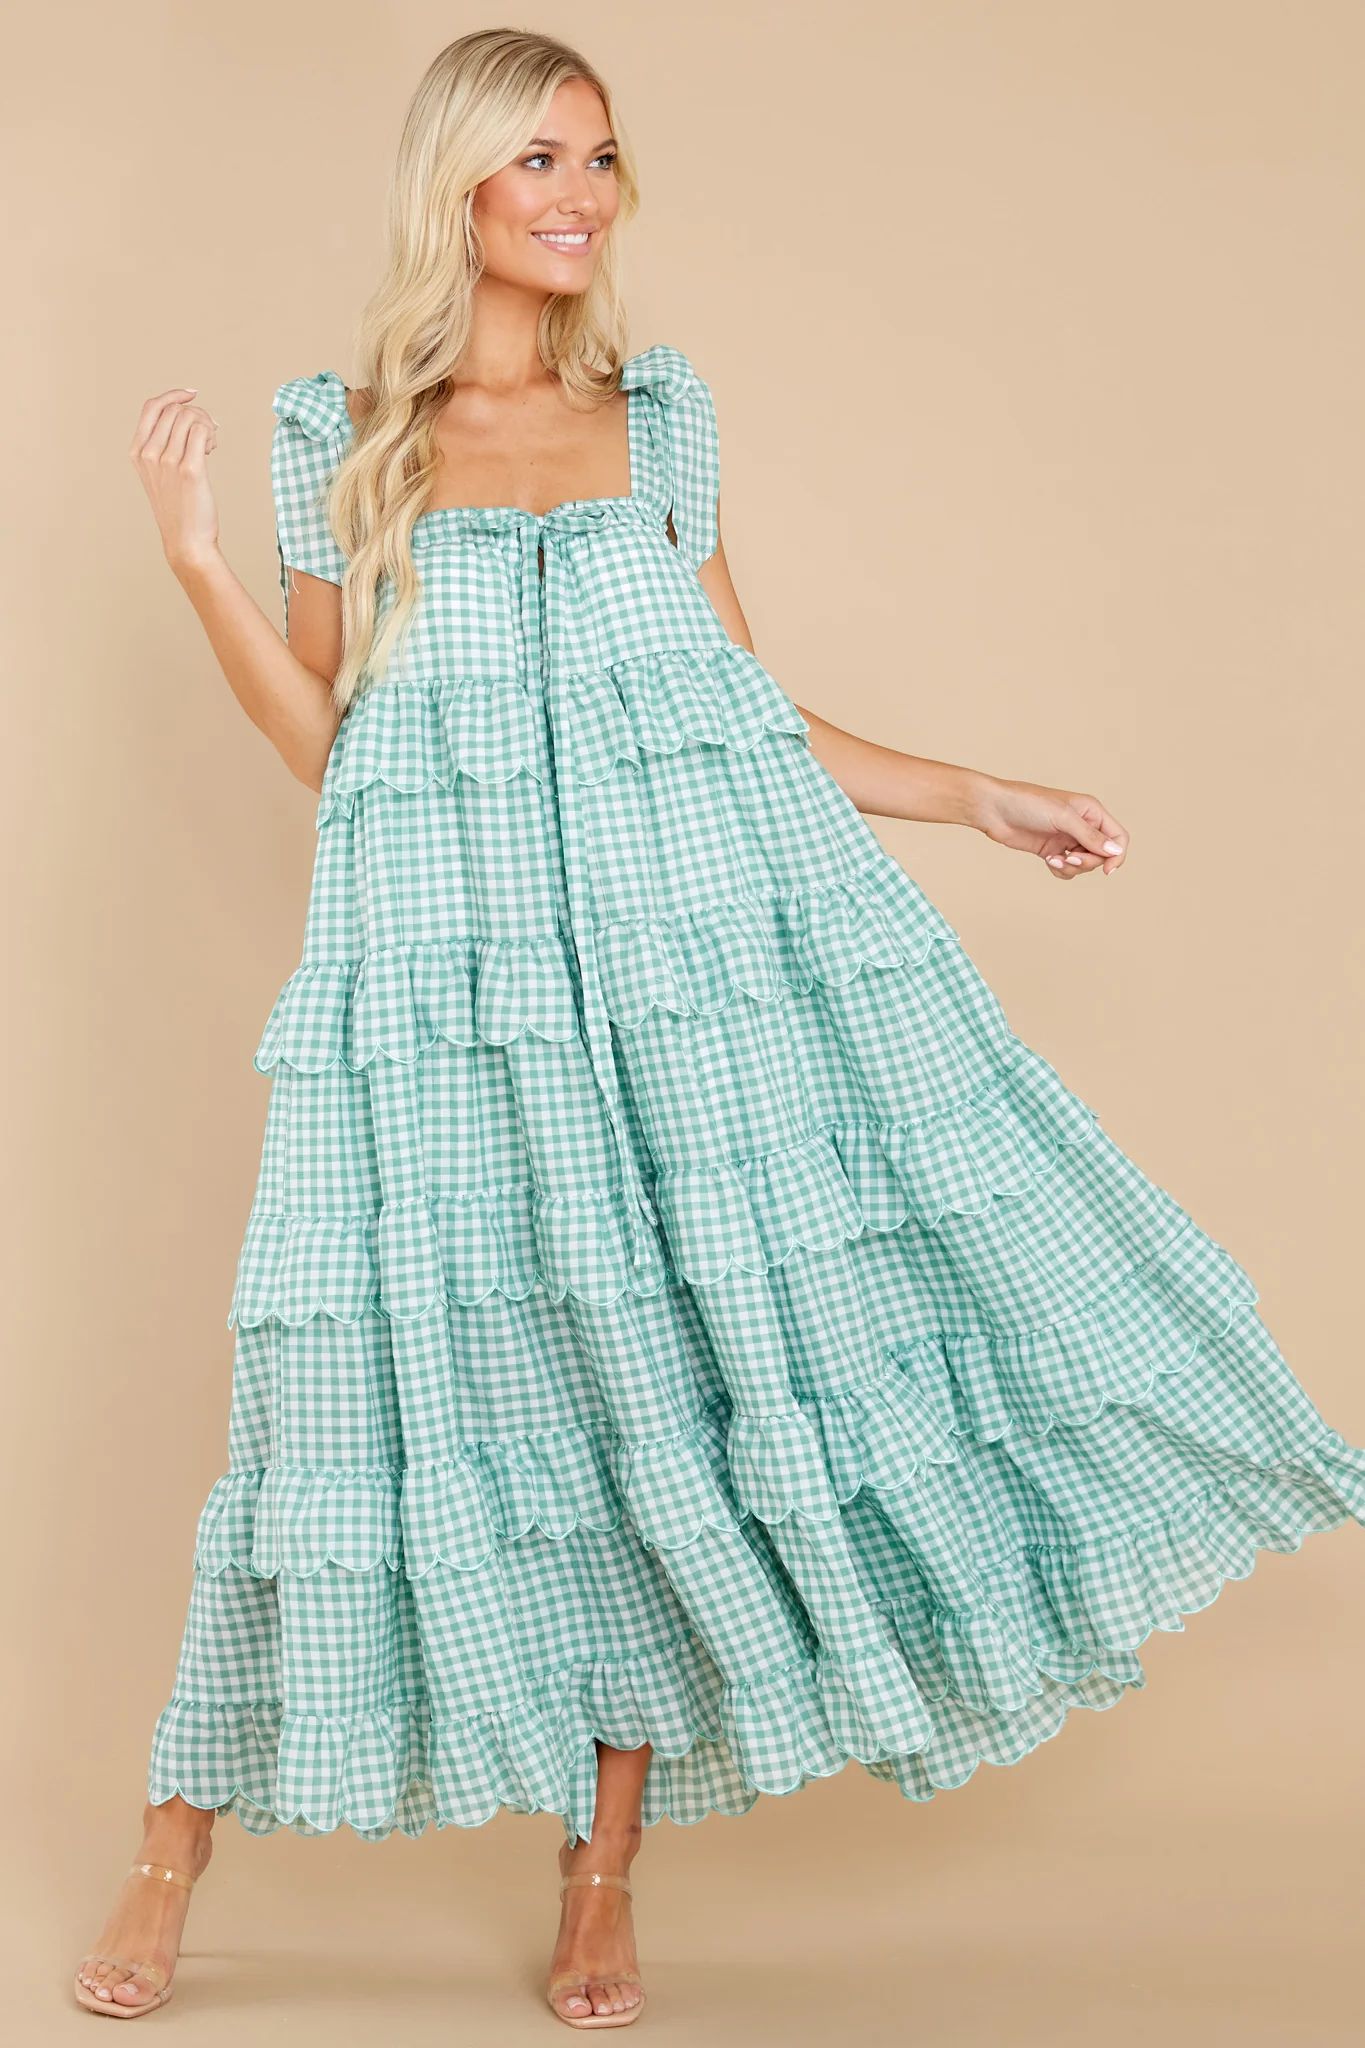 Made To Admire Aloe Green Gingham Dress | Red Dress 